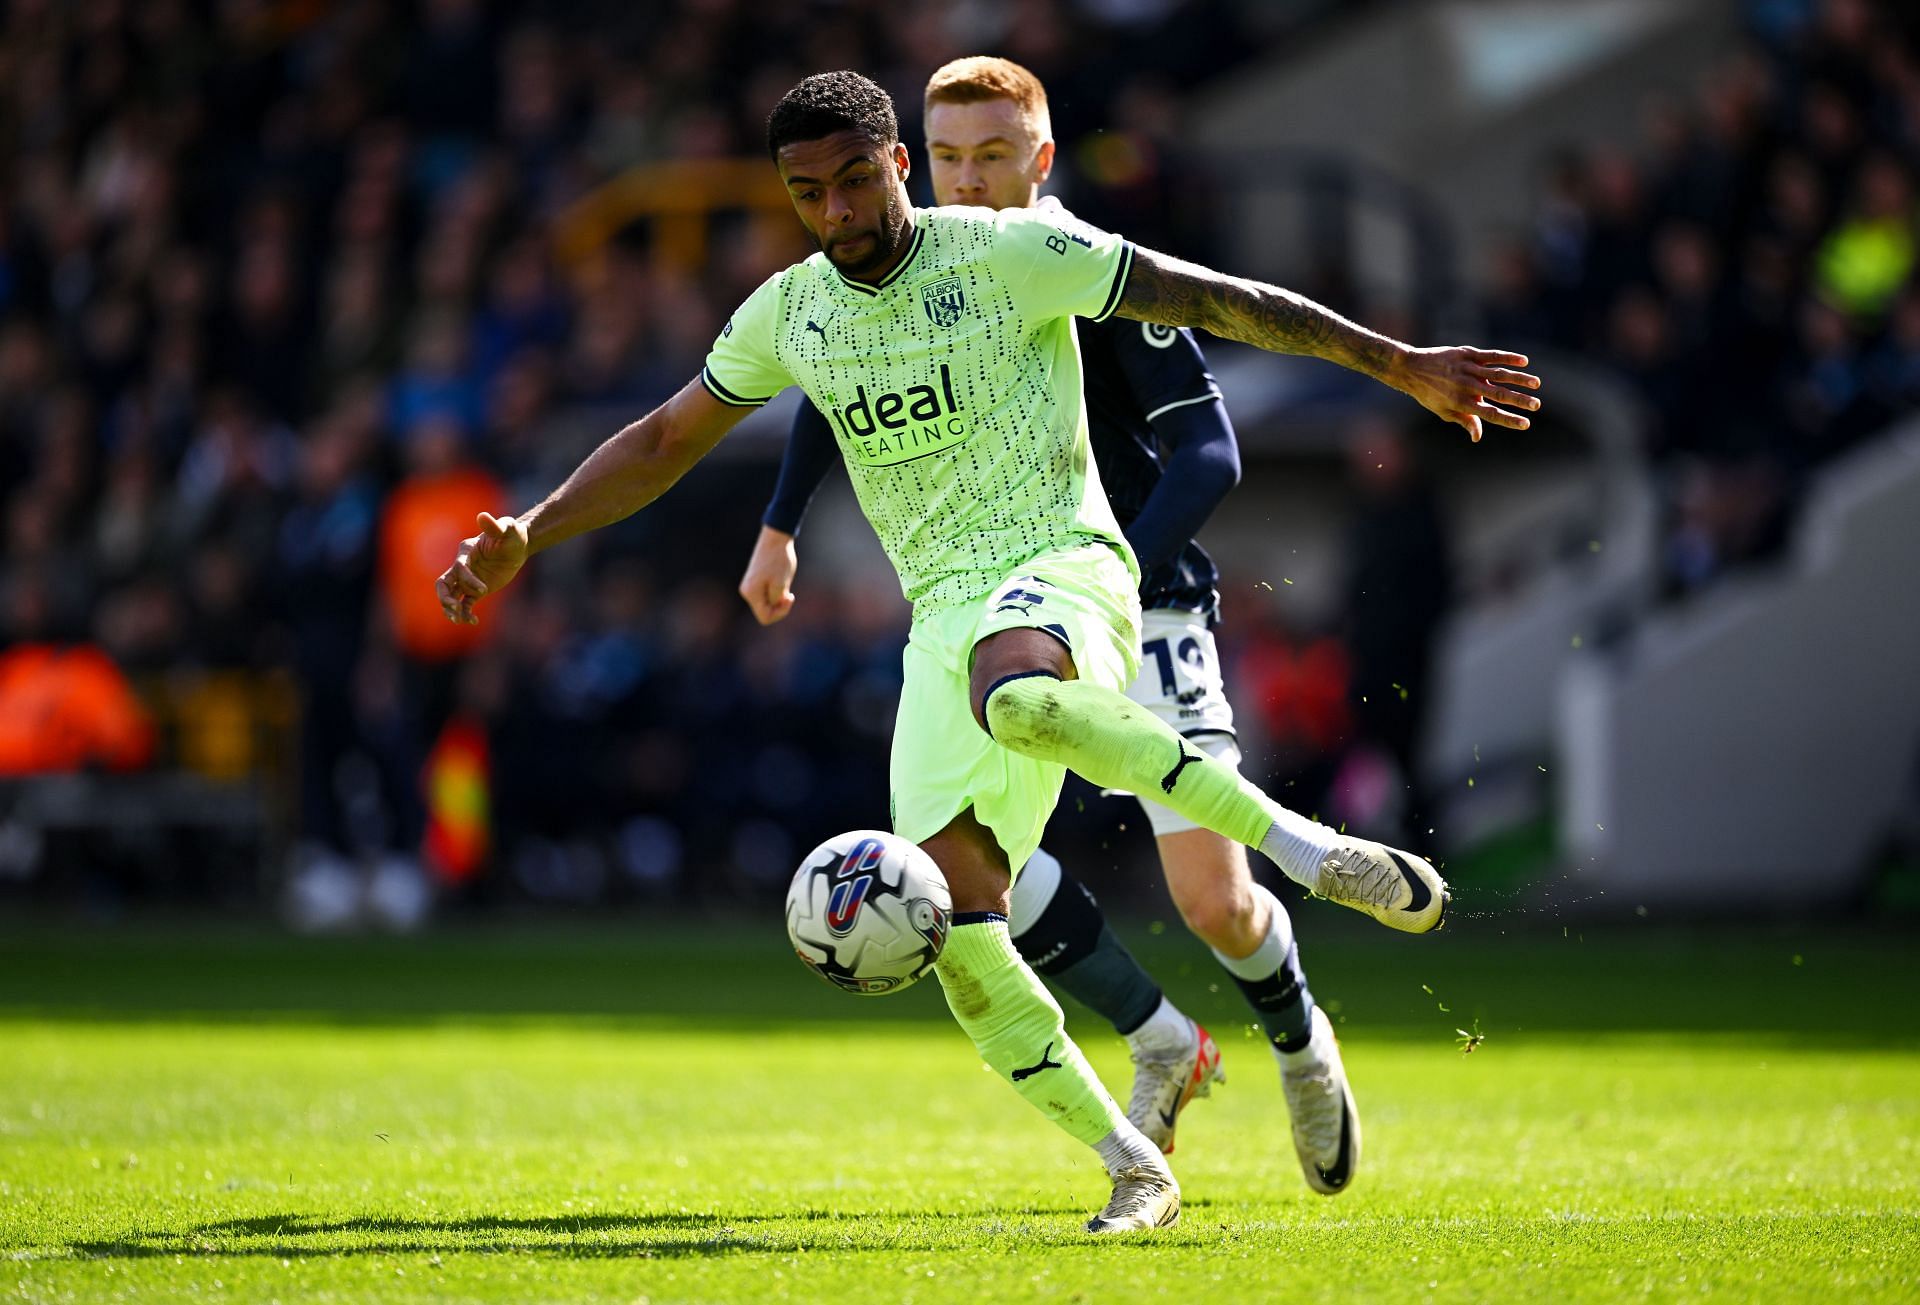 Millwall v West Bromwich Albion - Sky Bet Championship